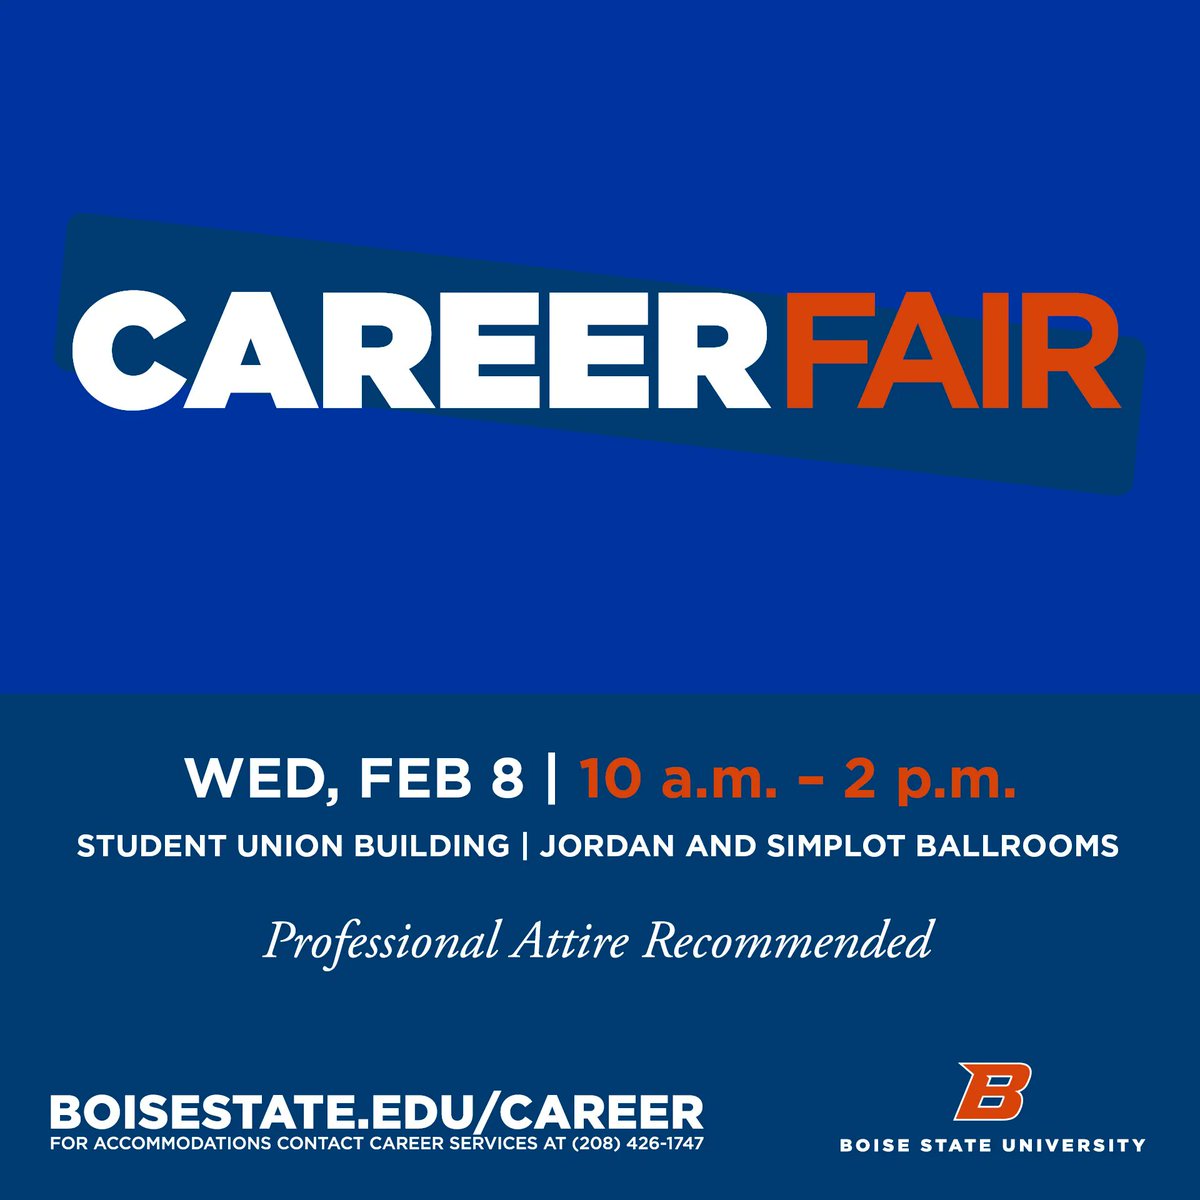 The spring Boise State Career Fair is coming, and it's going to be a big one! 150+ employers will be coming to campus to meet you on February 8 from 10am - 2pm. We'll be in both the Jordan and Simplot ballrooms again this semester. #BoiseStateCareerFair #BeyondBoiseState